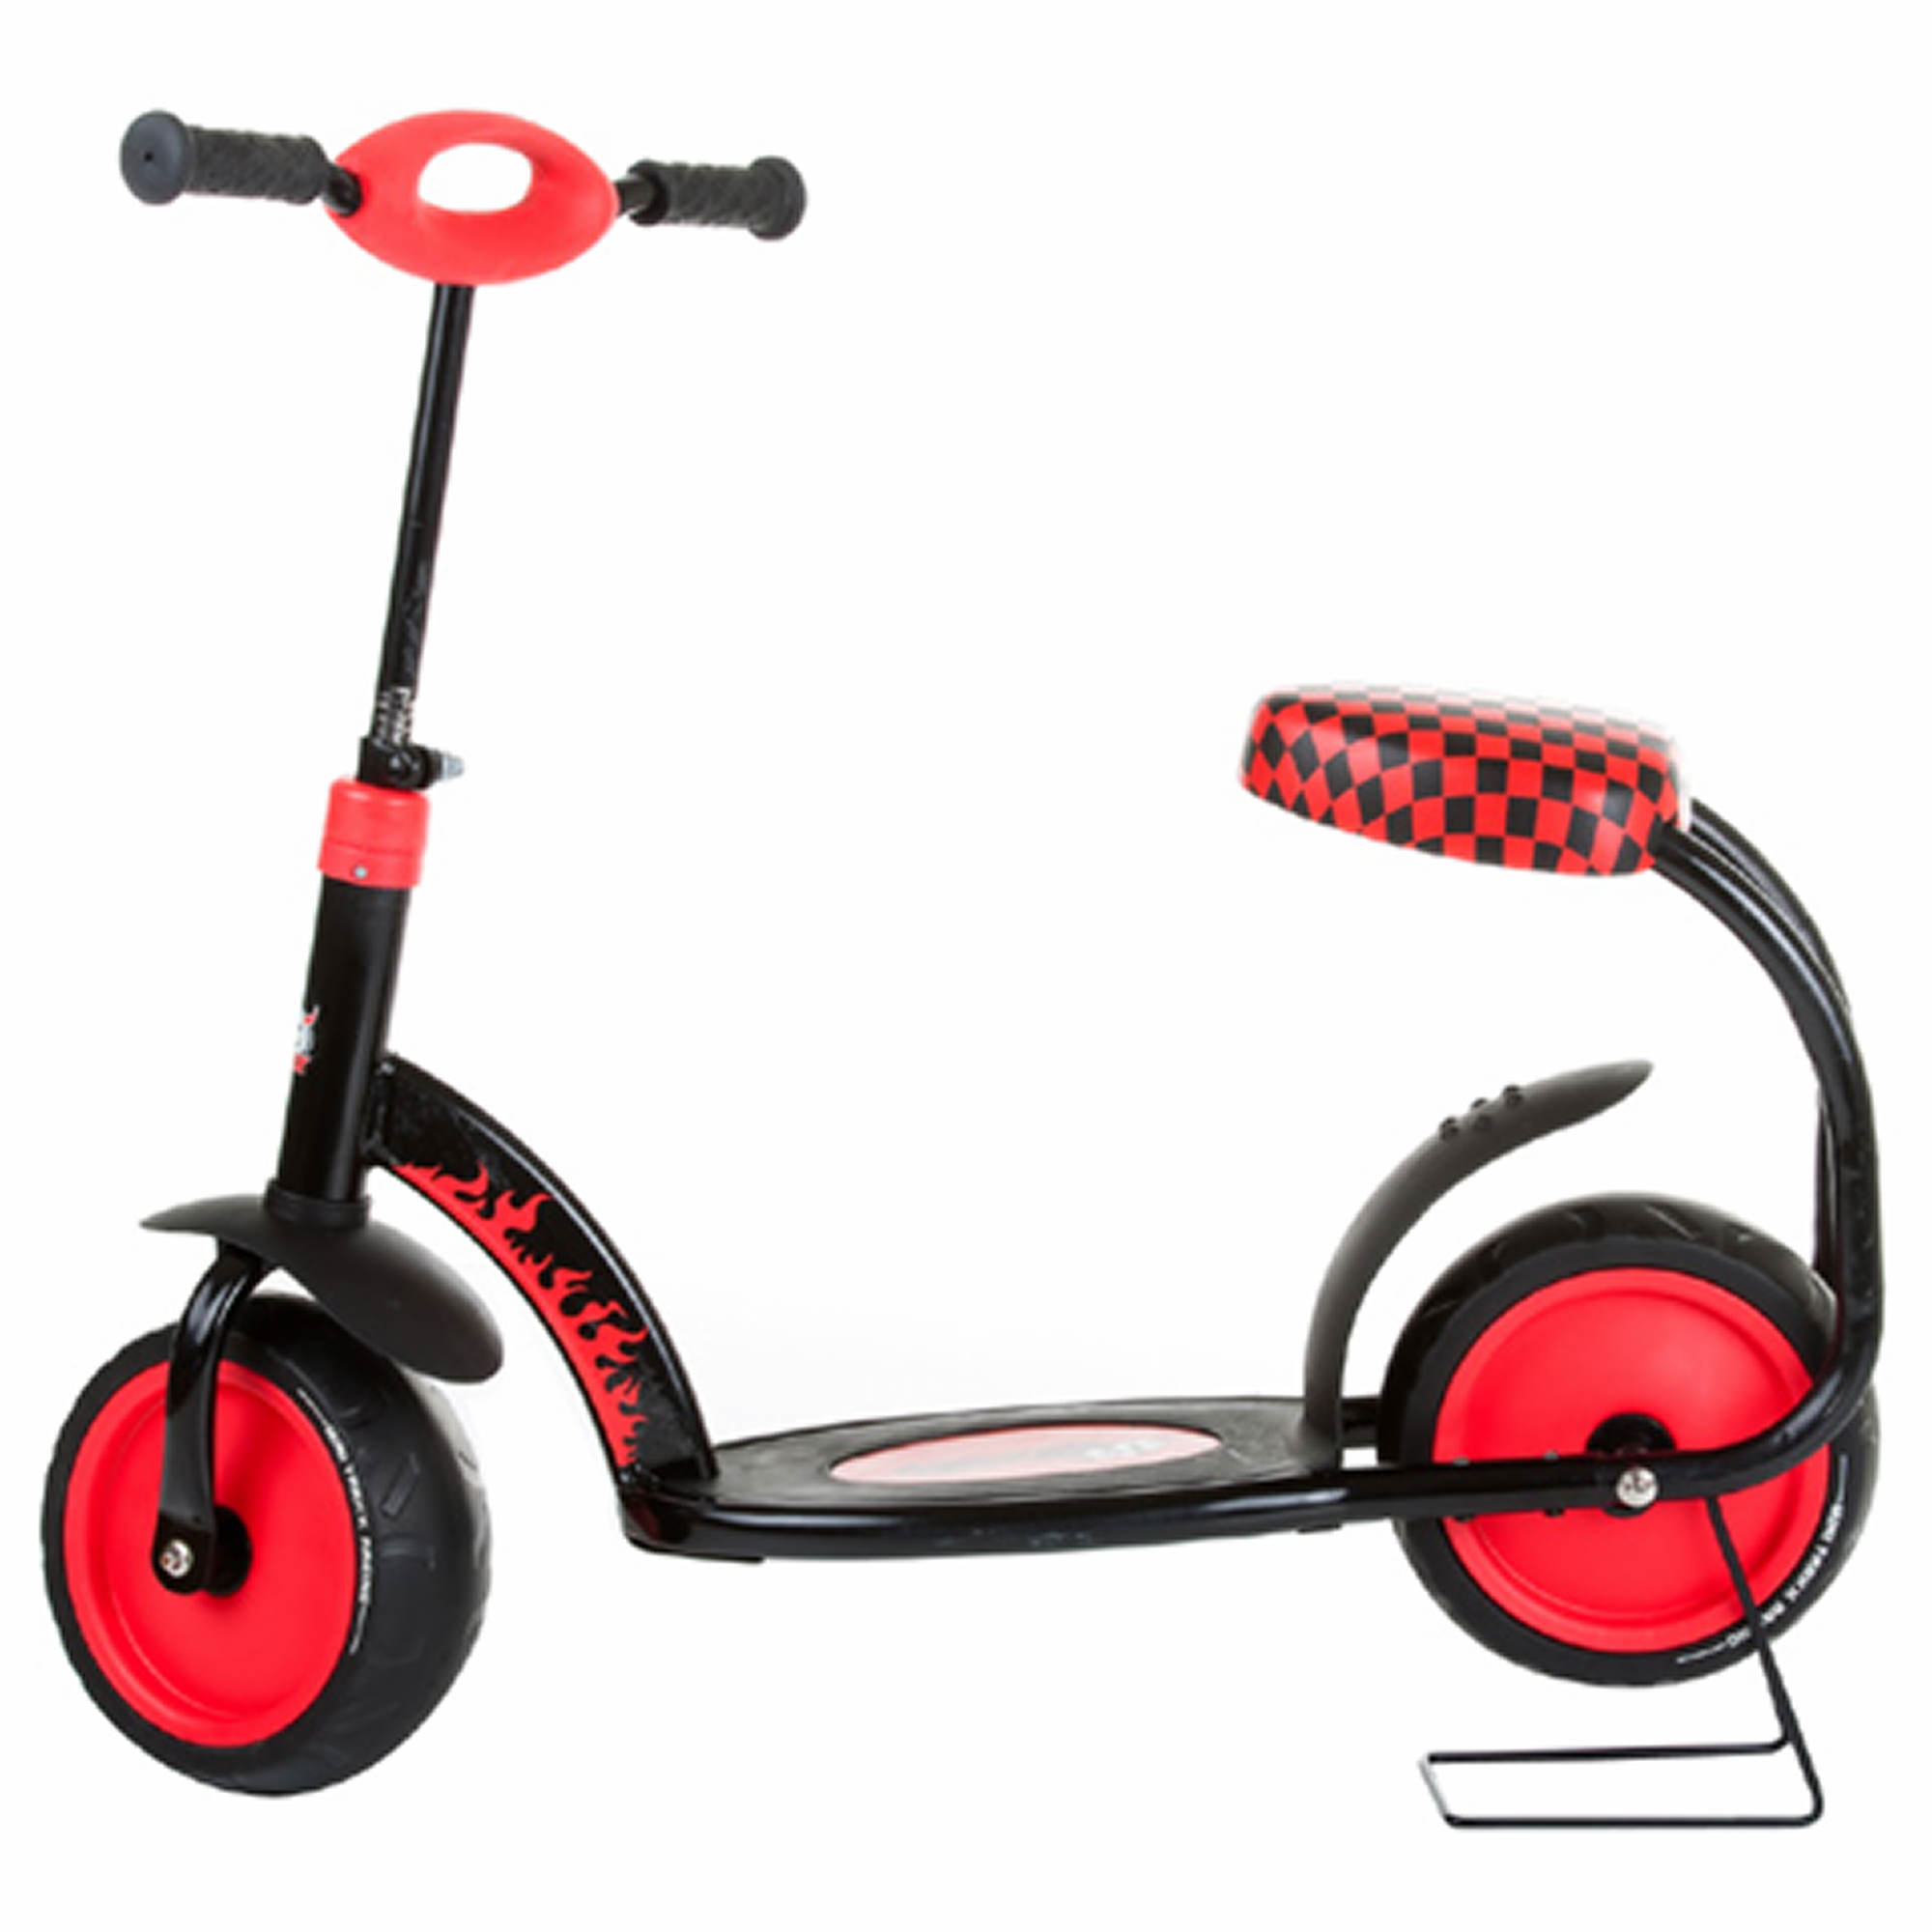 Hauck Traxx Besta Scooter Flame Red BJ's Wholesale Club